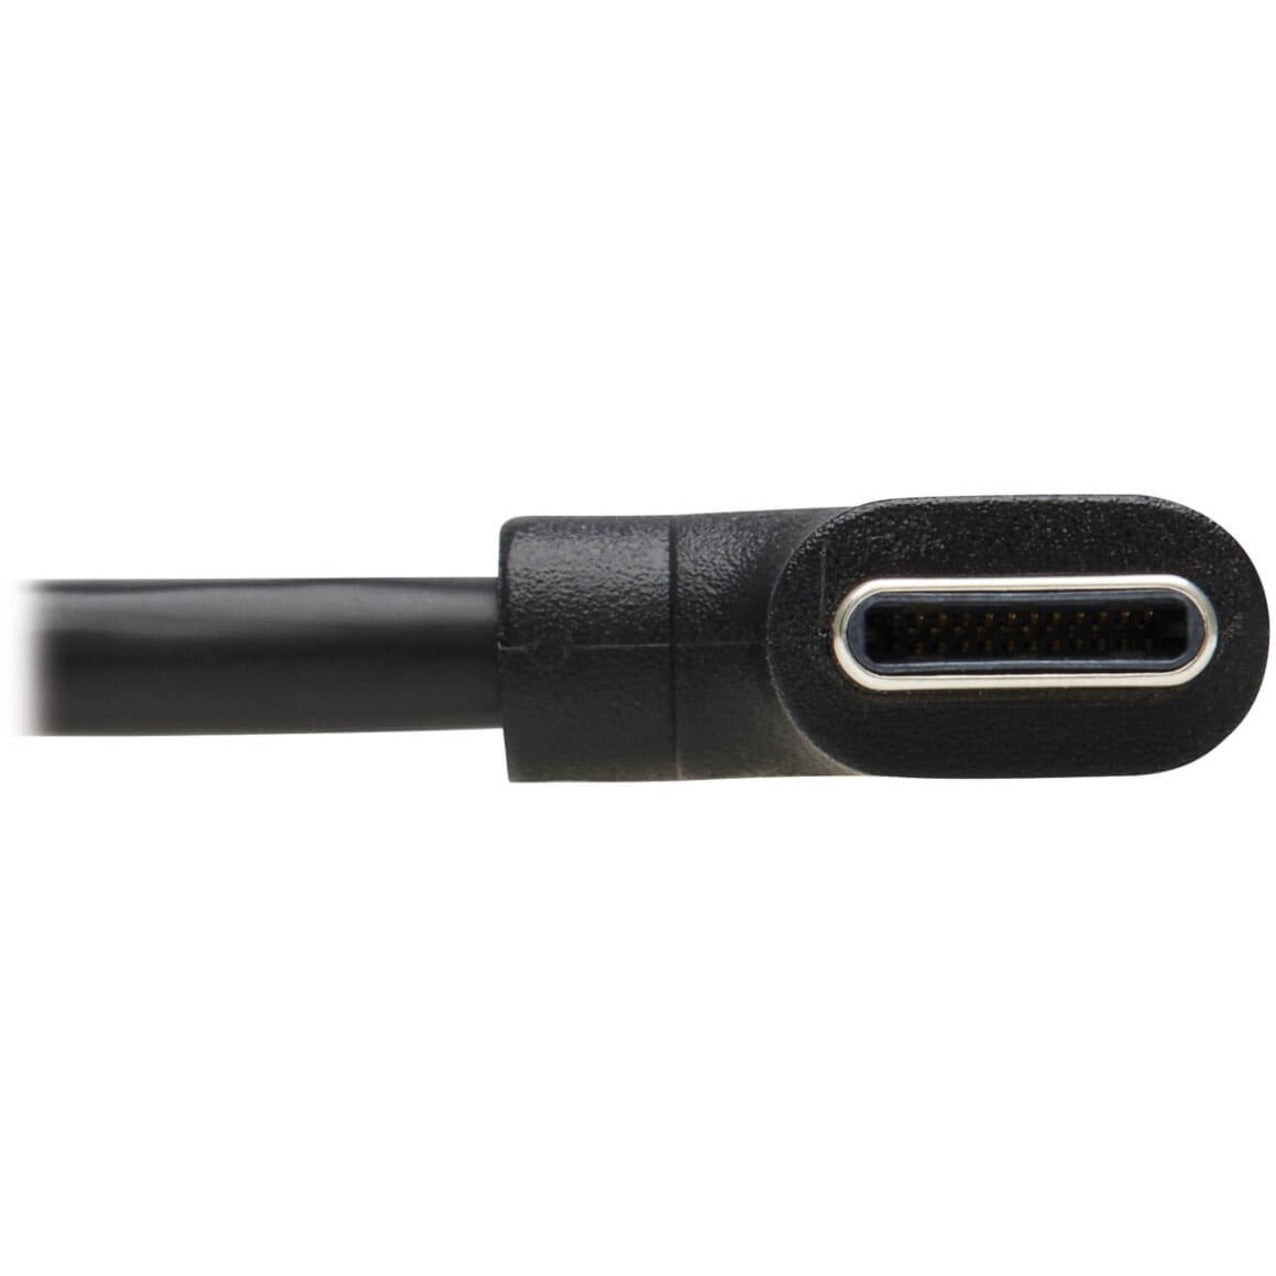 Tripp Lite U040-01M-C-RA USB-C to USB-C Cable, M/M, Black, 1 m (3.3 ft.), Right-Angled Connector, Reversible, USB-Power Delivery (USB PD), Charging